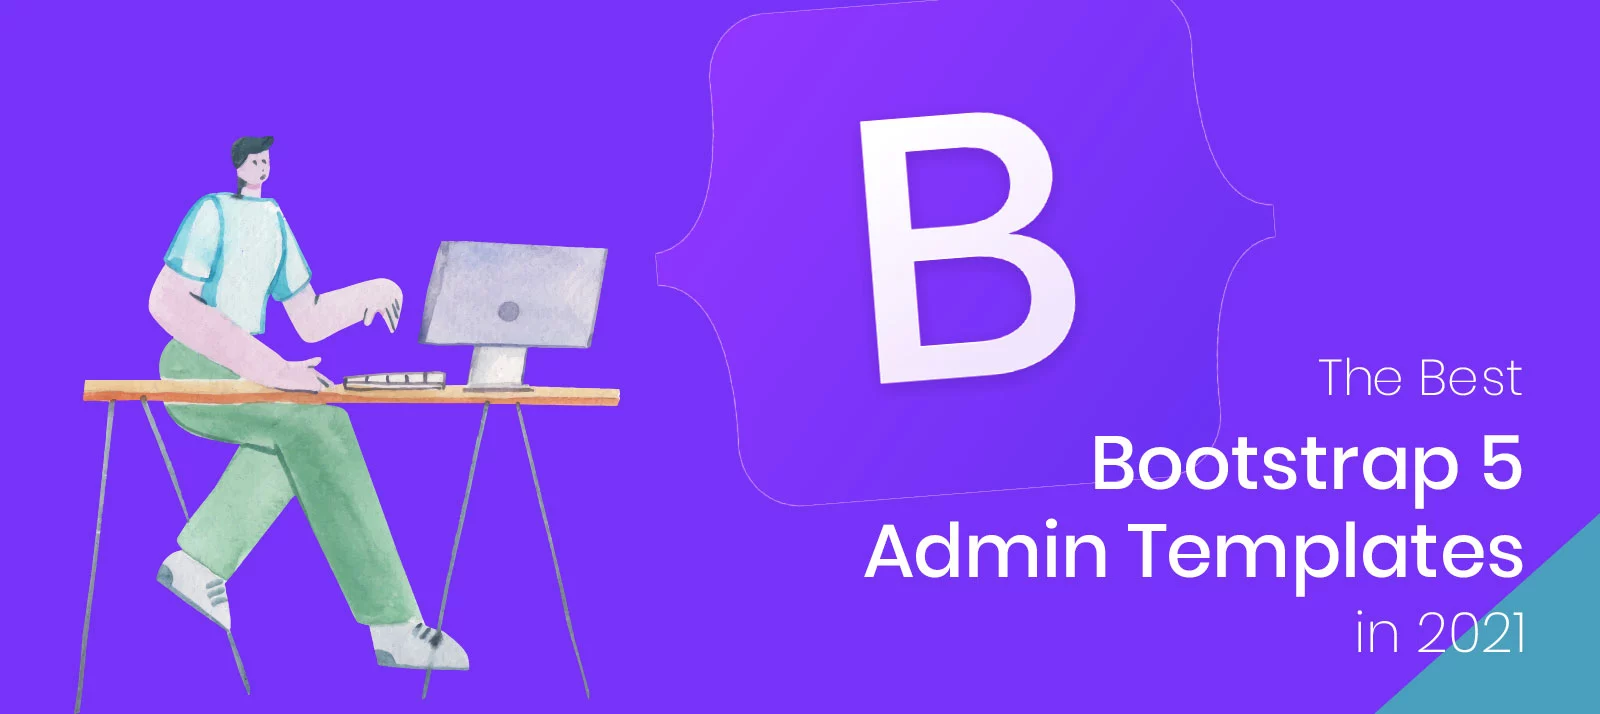  The Best Bootstrap 5 Admin Templates in 2022